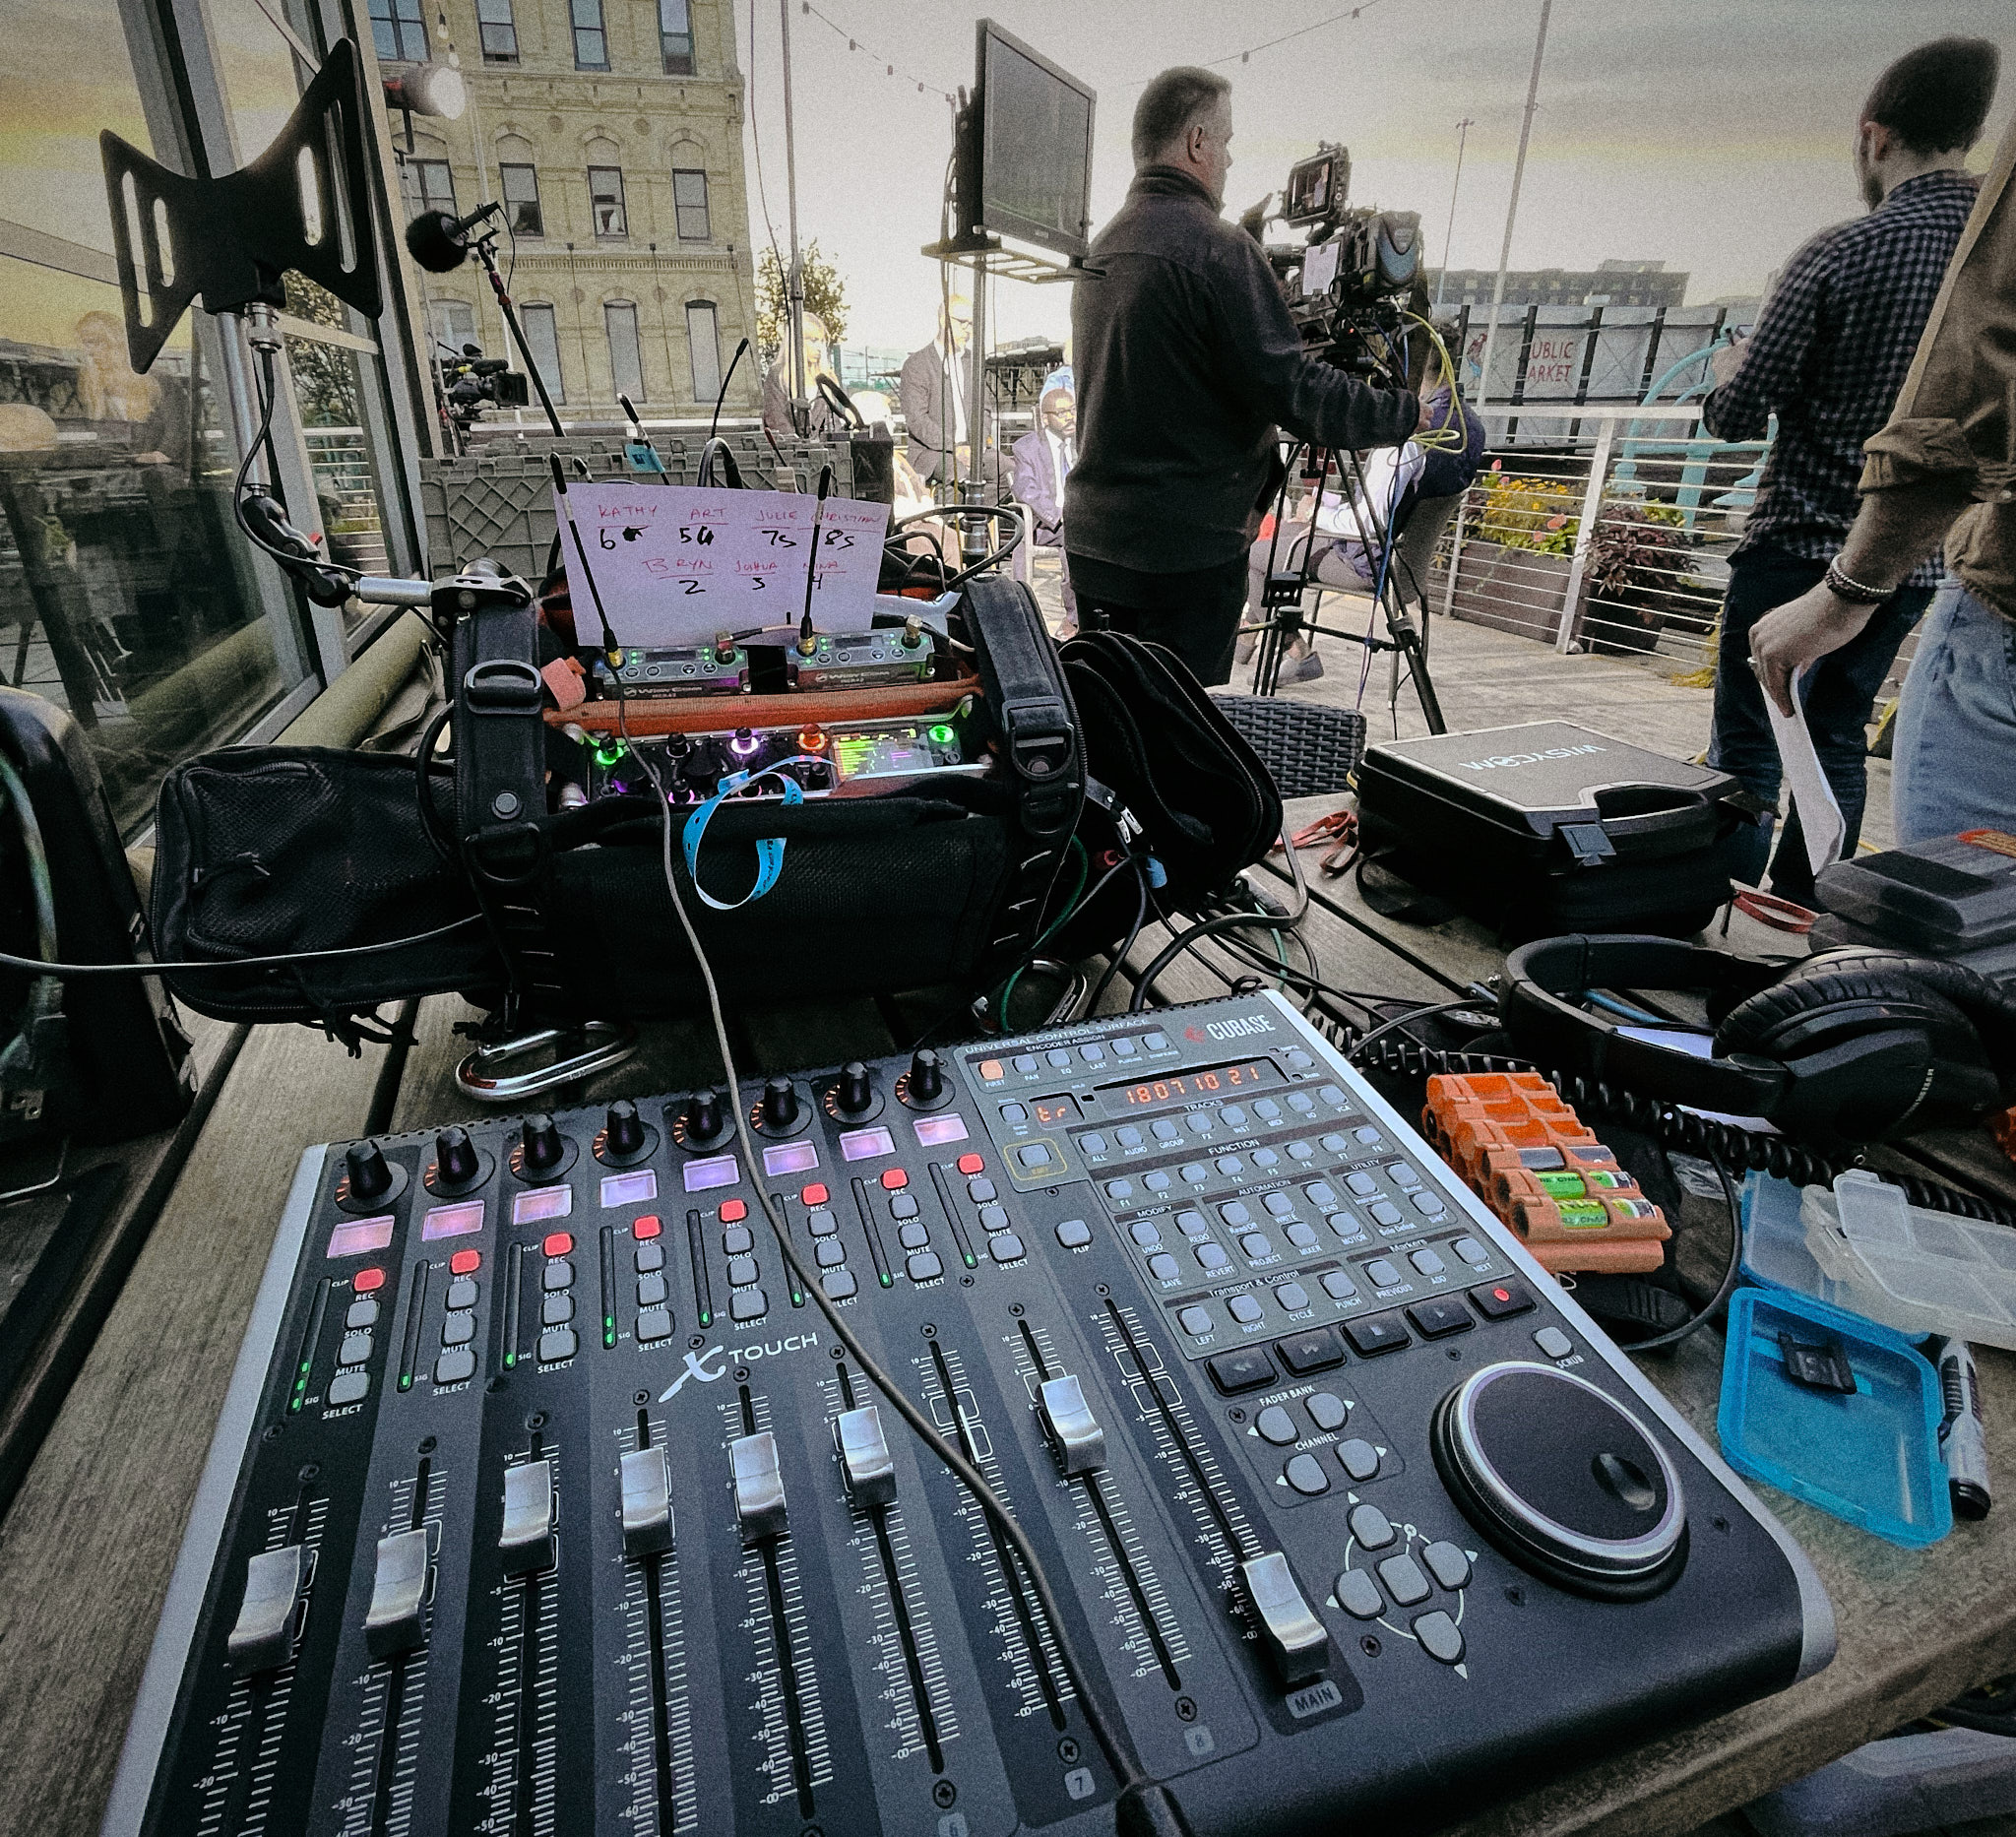 8 Wireless lavs and 4 camera feeds for a live broadcast ? No problem just another day at work. Recently added Plus 4+ option to handle up to 12 live mics.